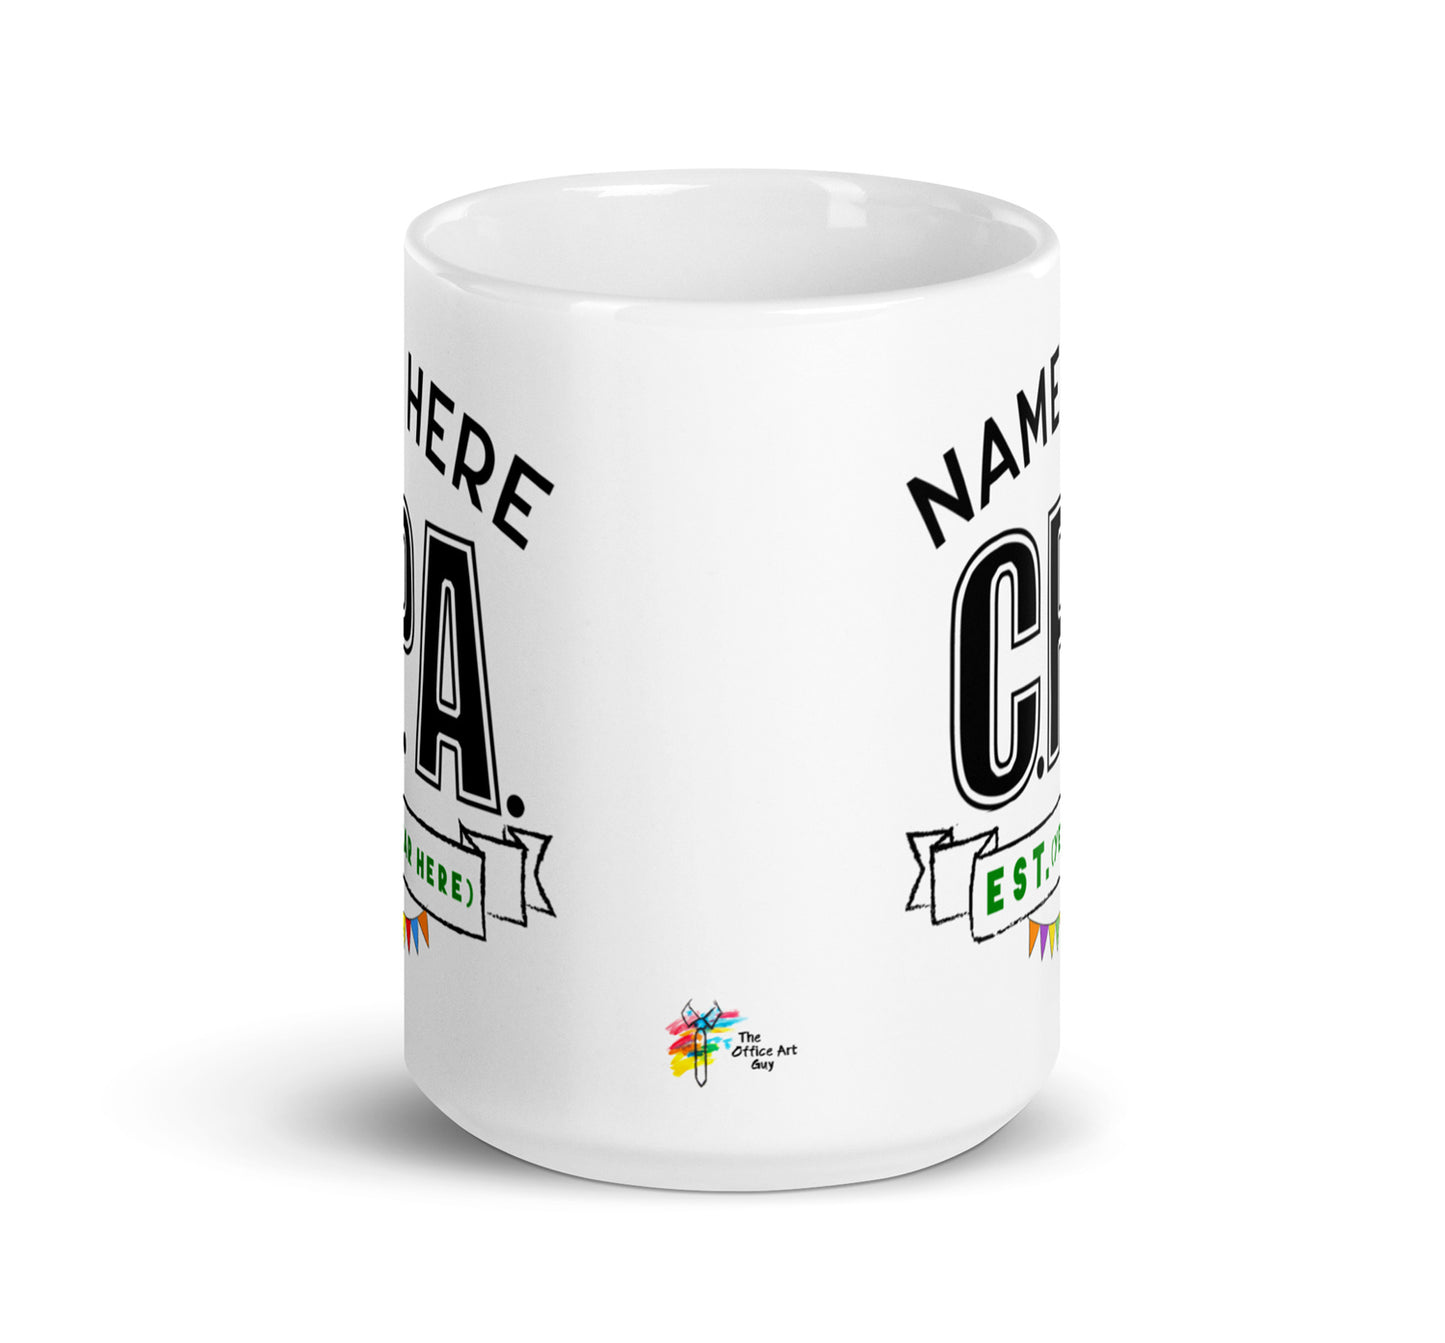 CPA Gift for Passing CPA Exams, Personalized Mug with Name and Year